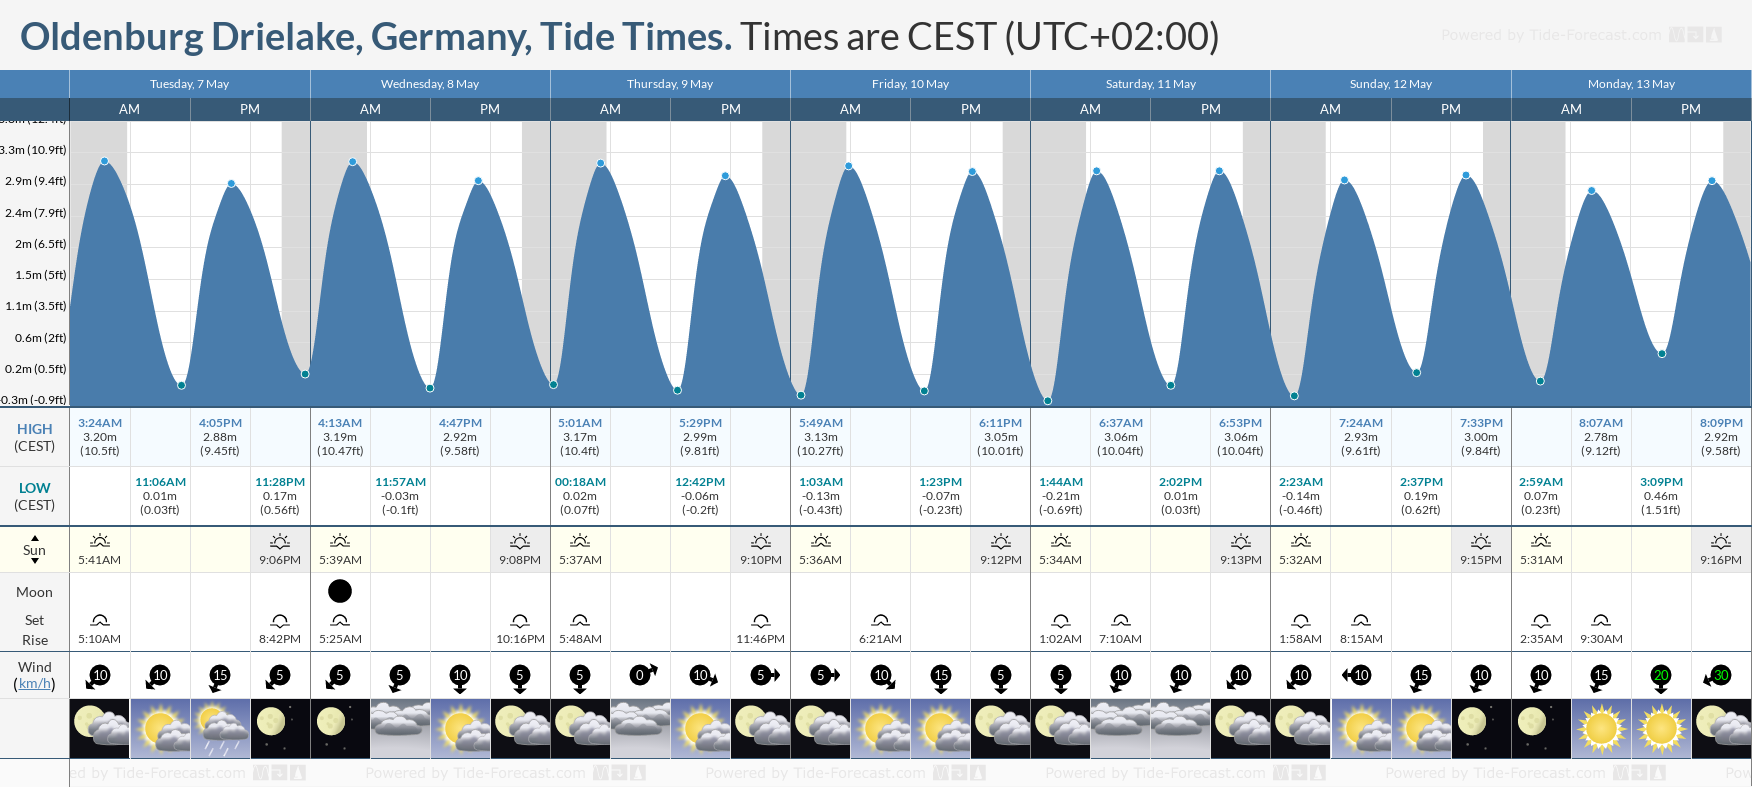 Oldenburg Drielake, Germany Tide Chart including high and low tide tide times for the next 7 days